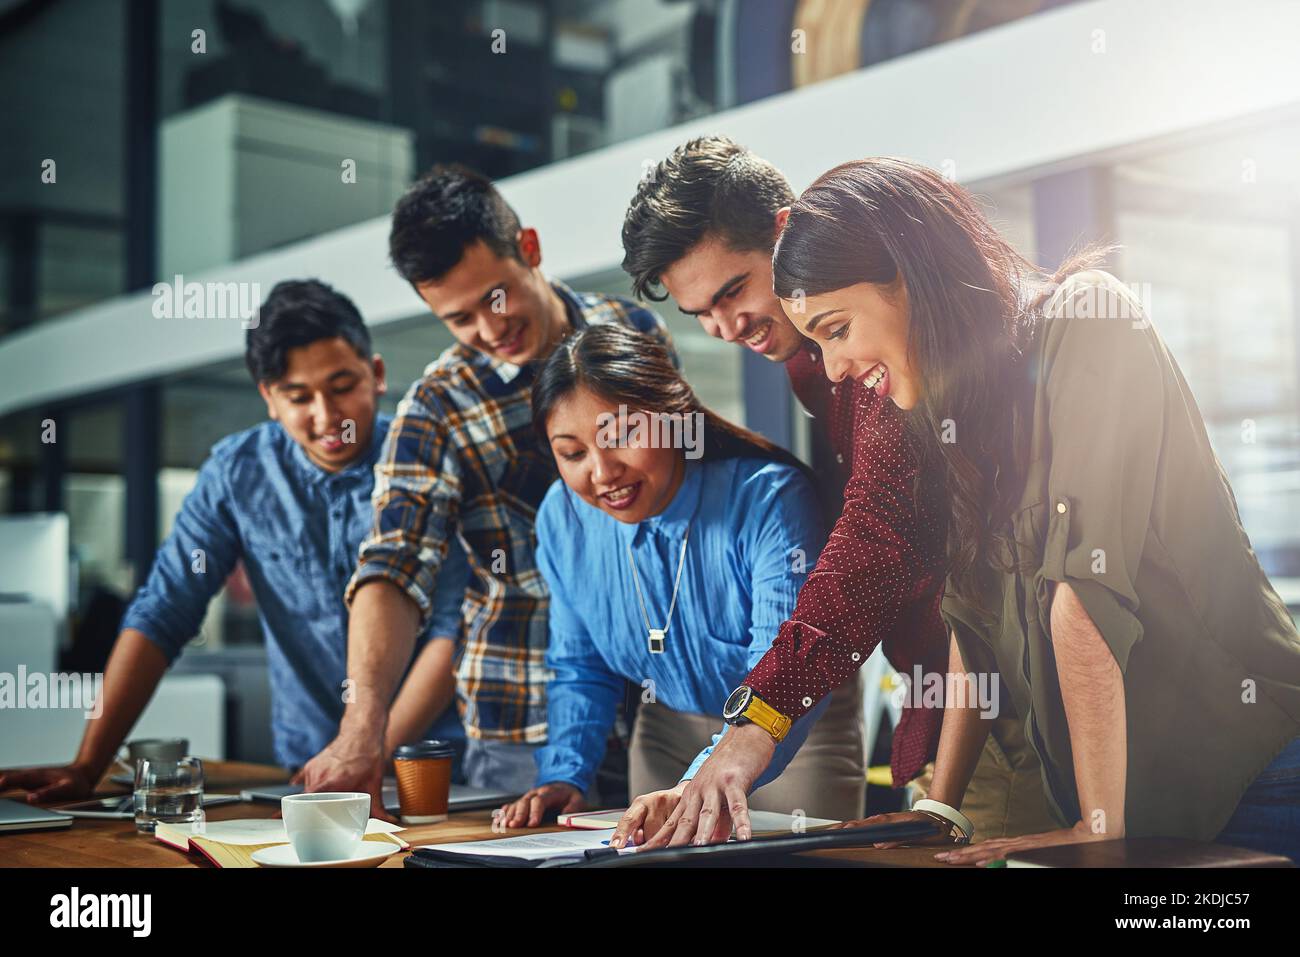 Conceiving their next big concept. a team of designers working together in an office. Stock Photo